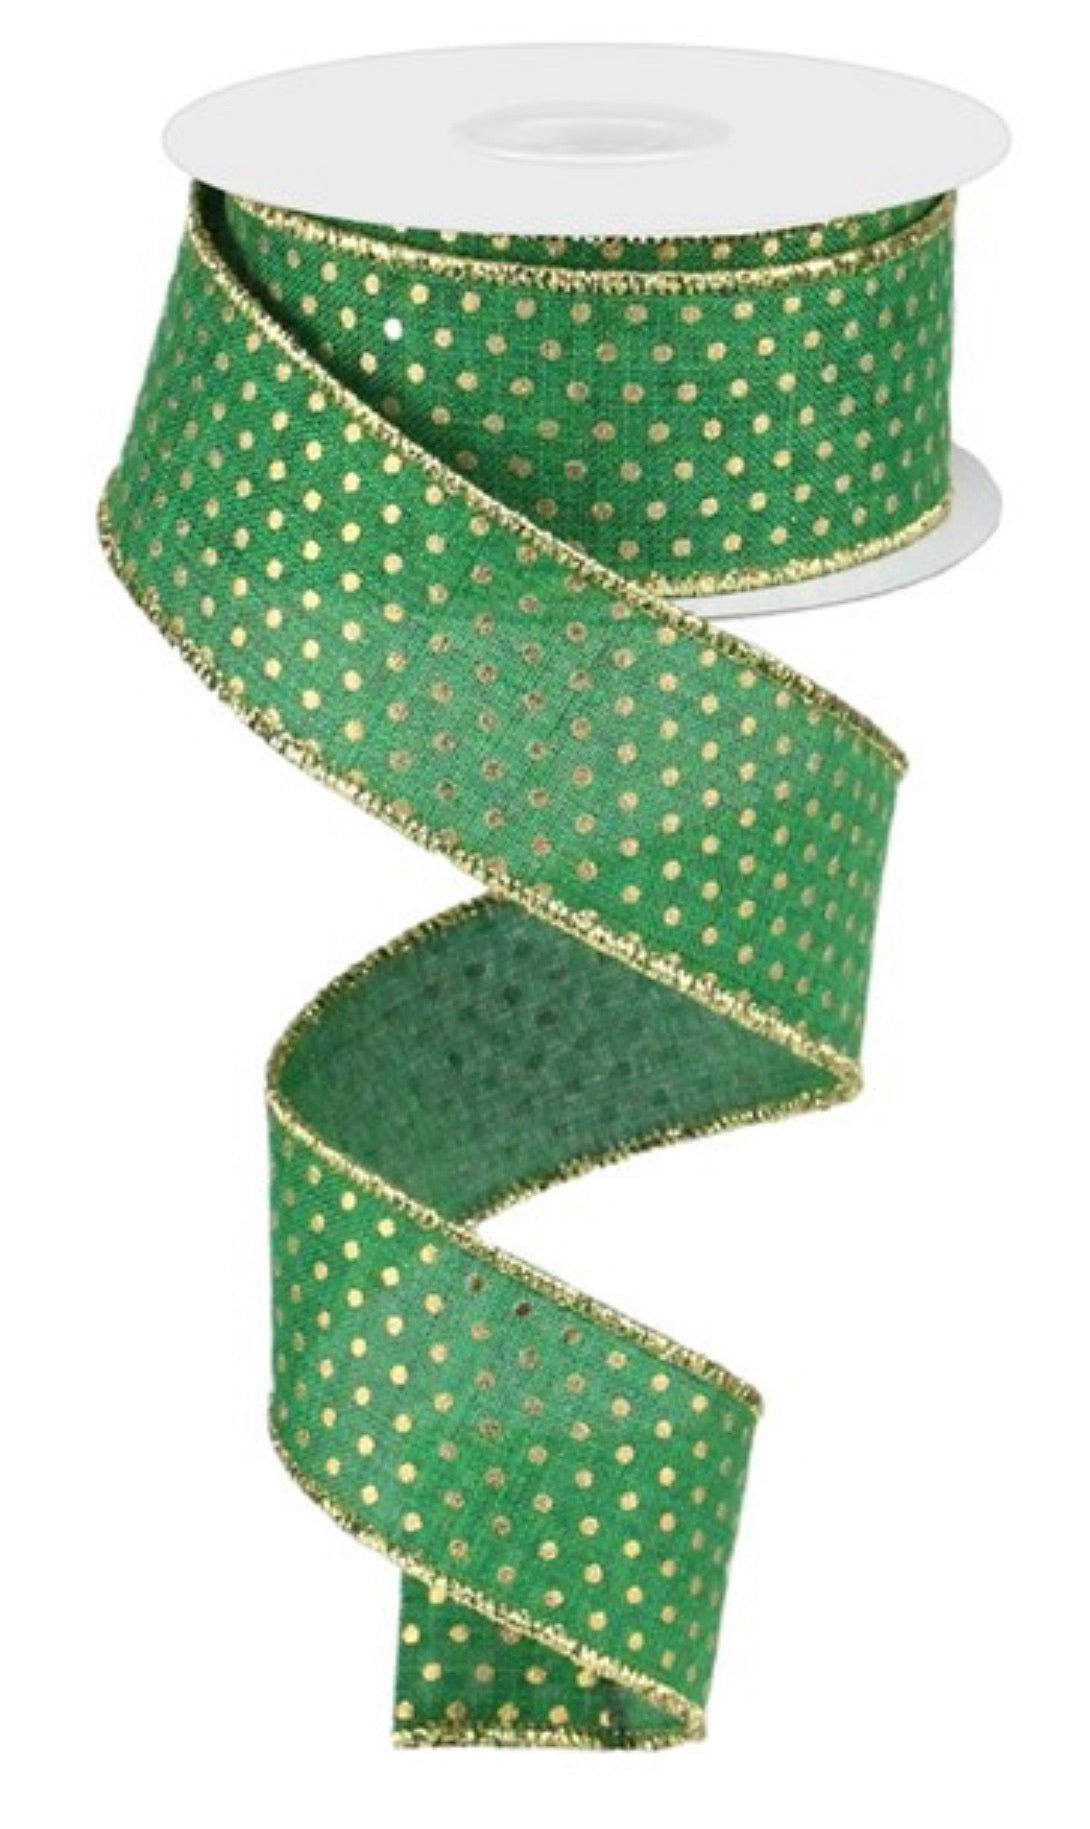 Emerald green with gold dots ribbon 1.5